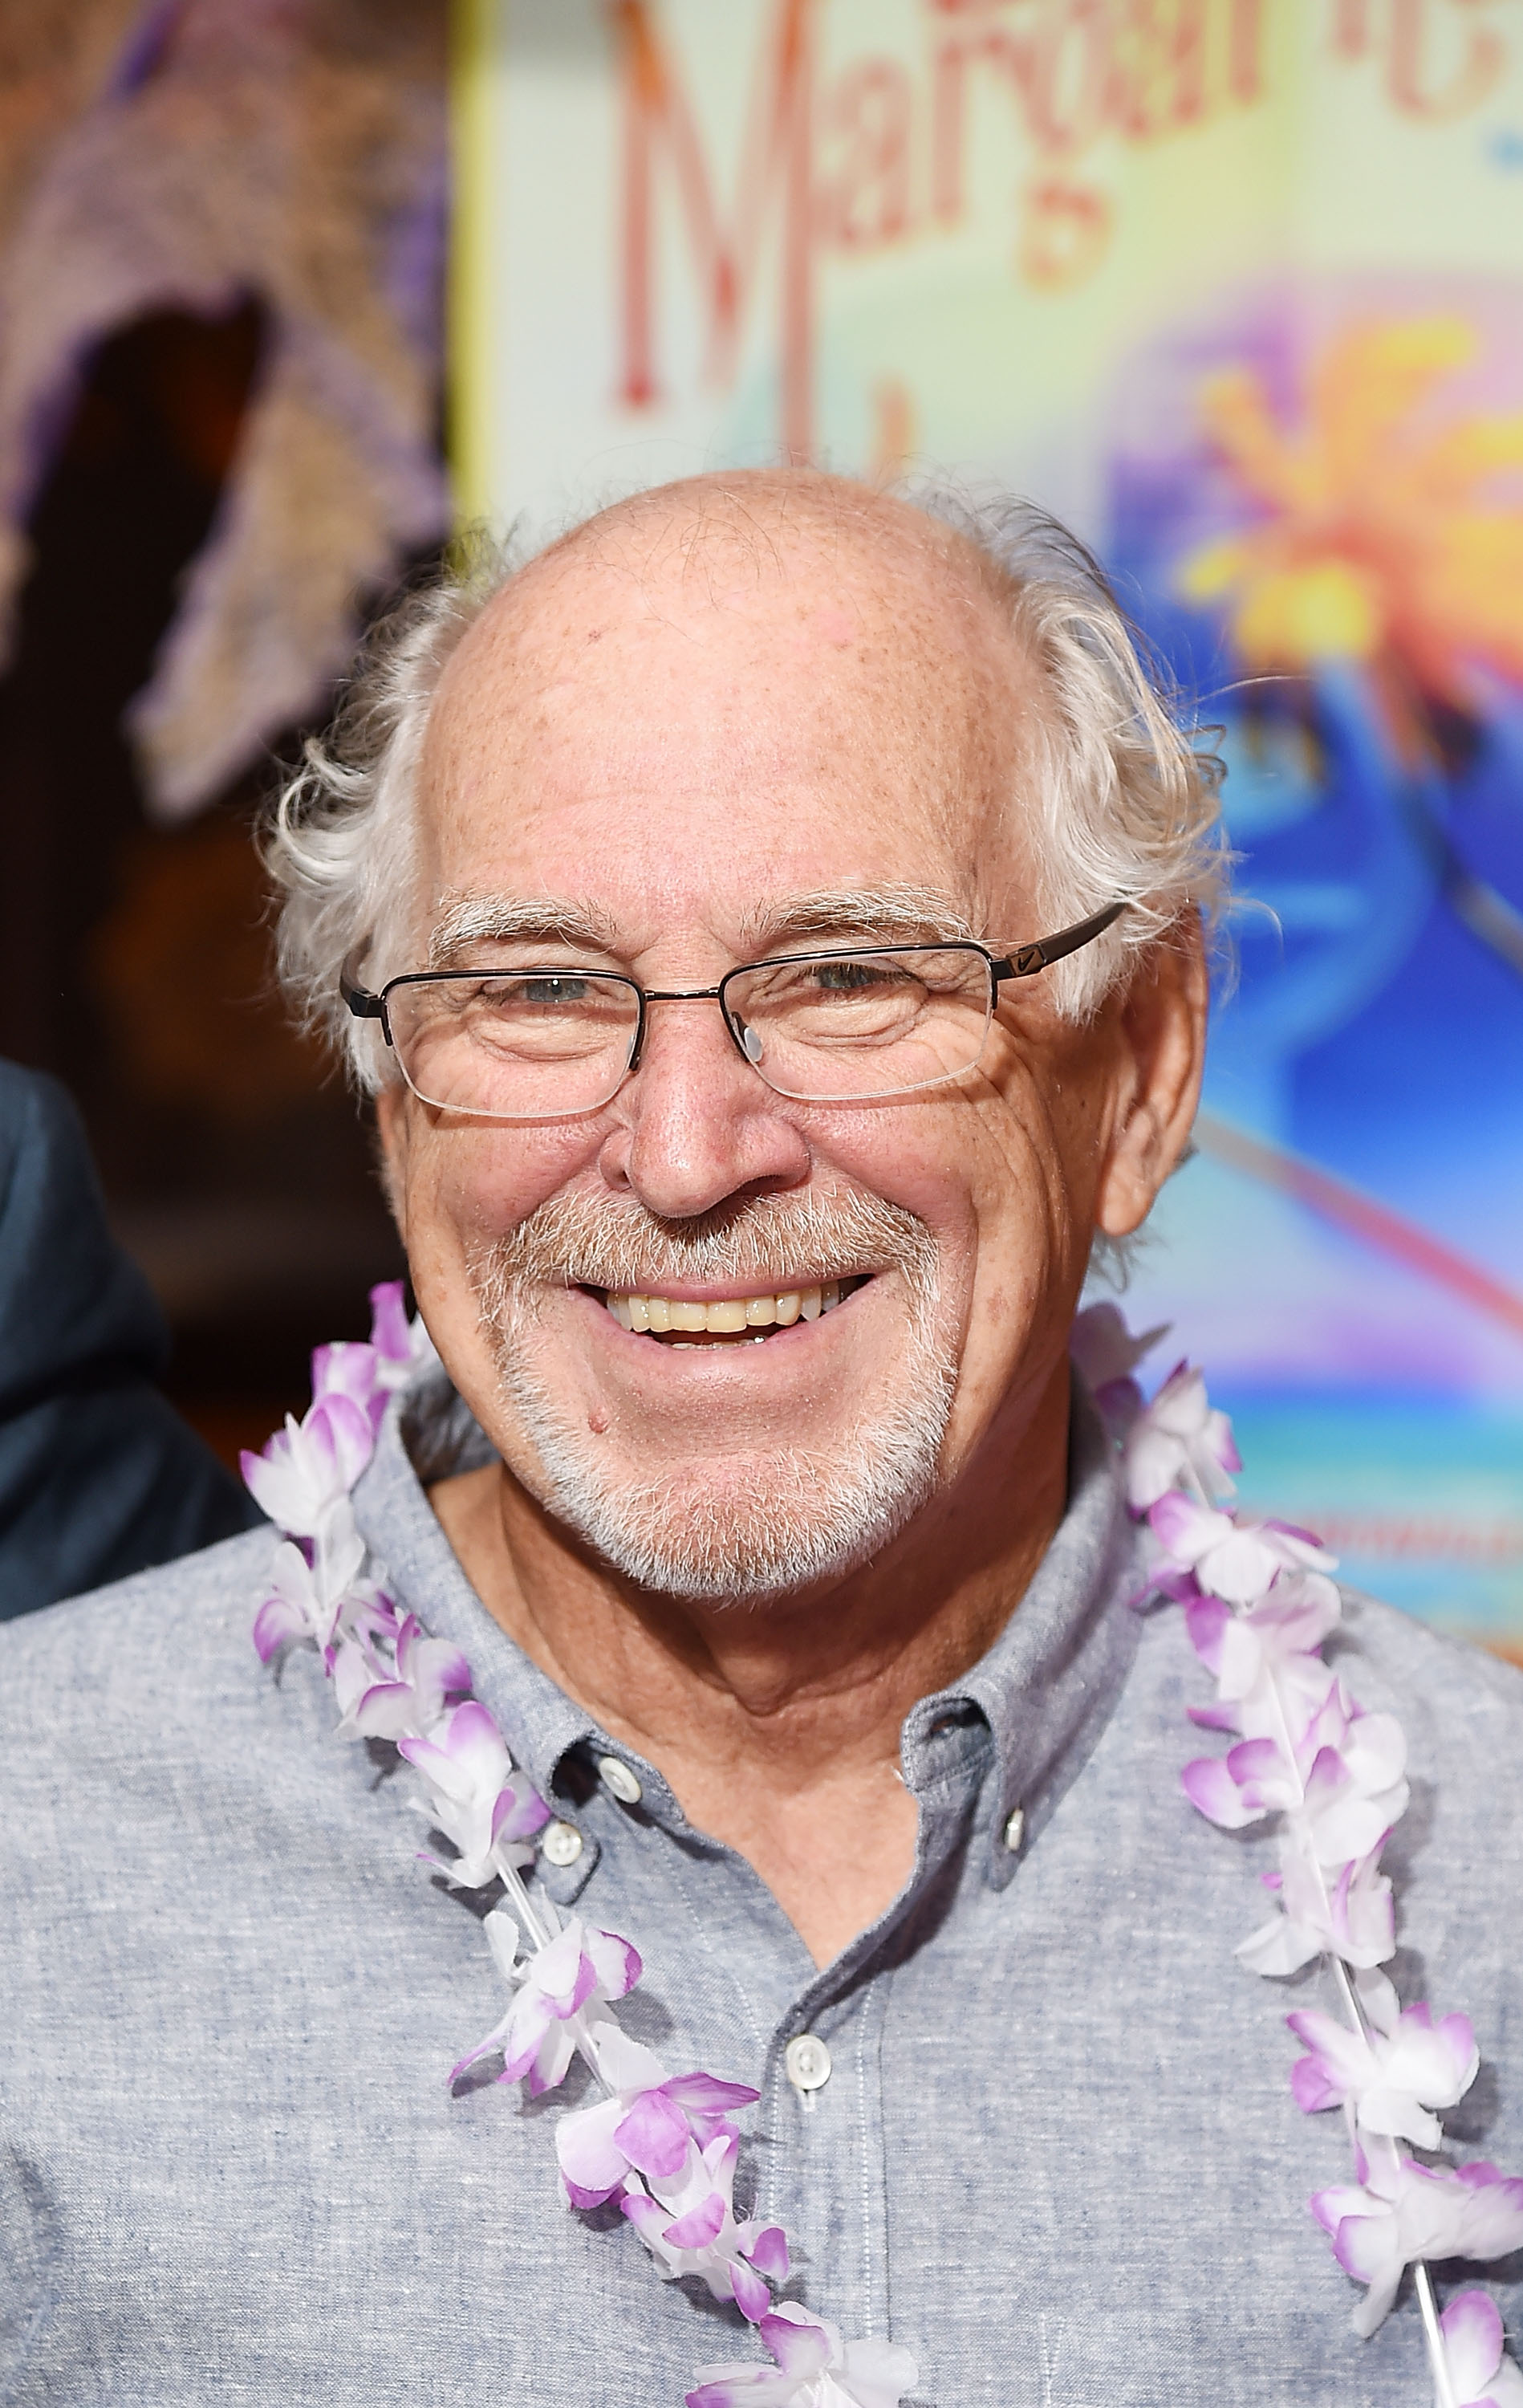 Margie Washichek Was Jimmy Buffett’s 1st Wife before His Fame: What We ...